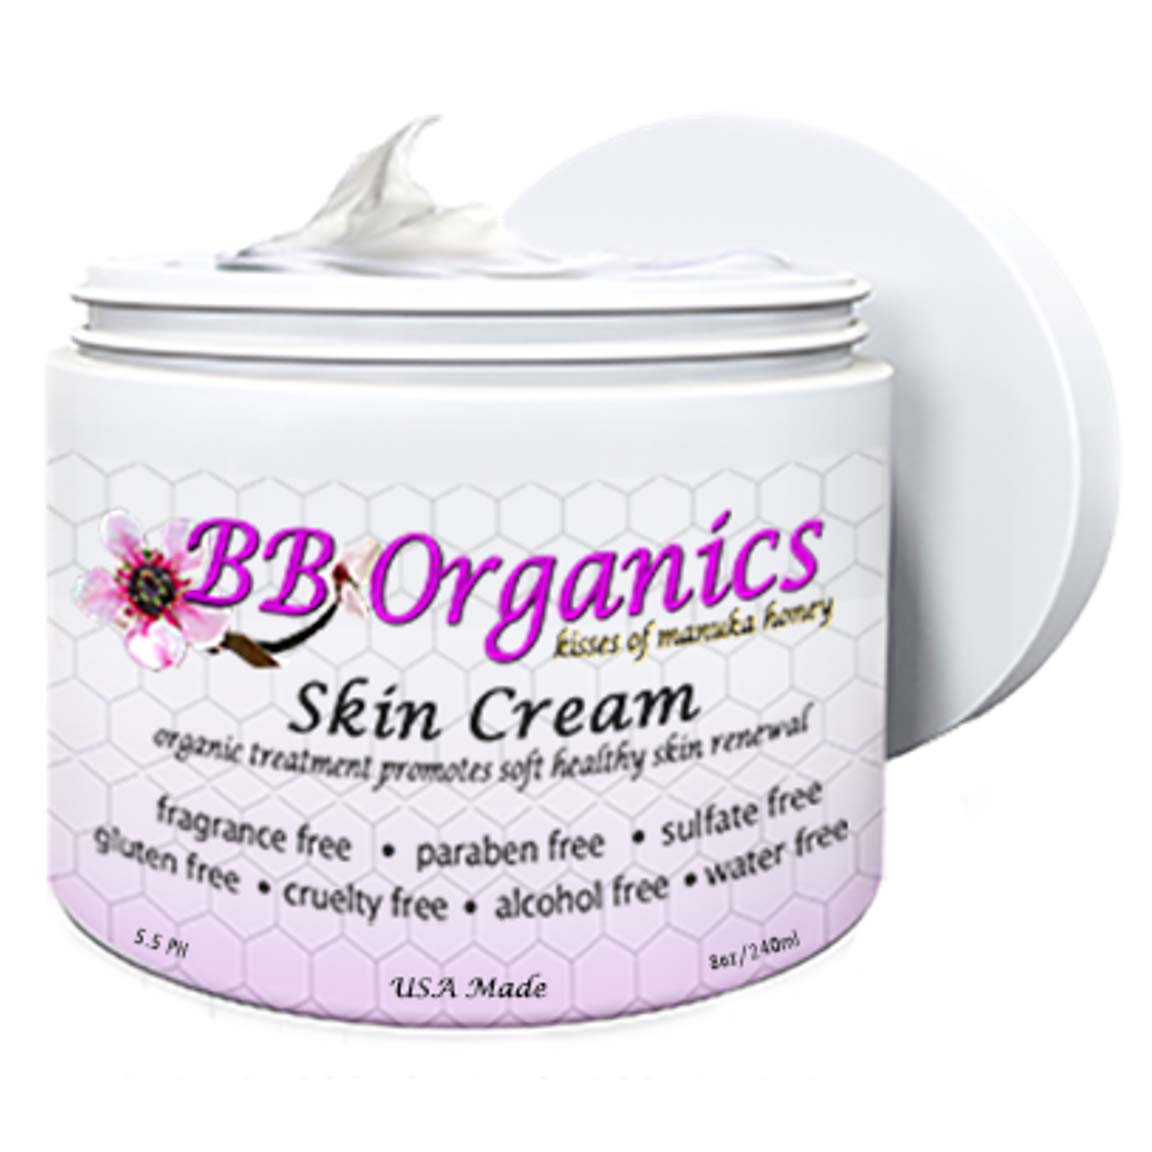 A jar with a label. The label has the BB Organics logo and states that it is skin cream.